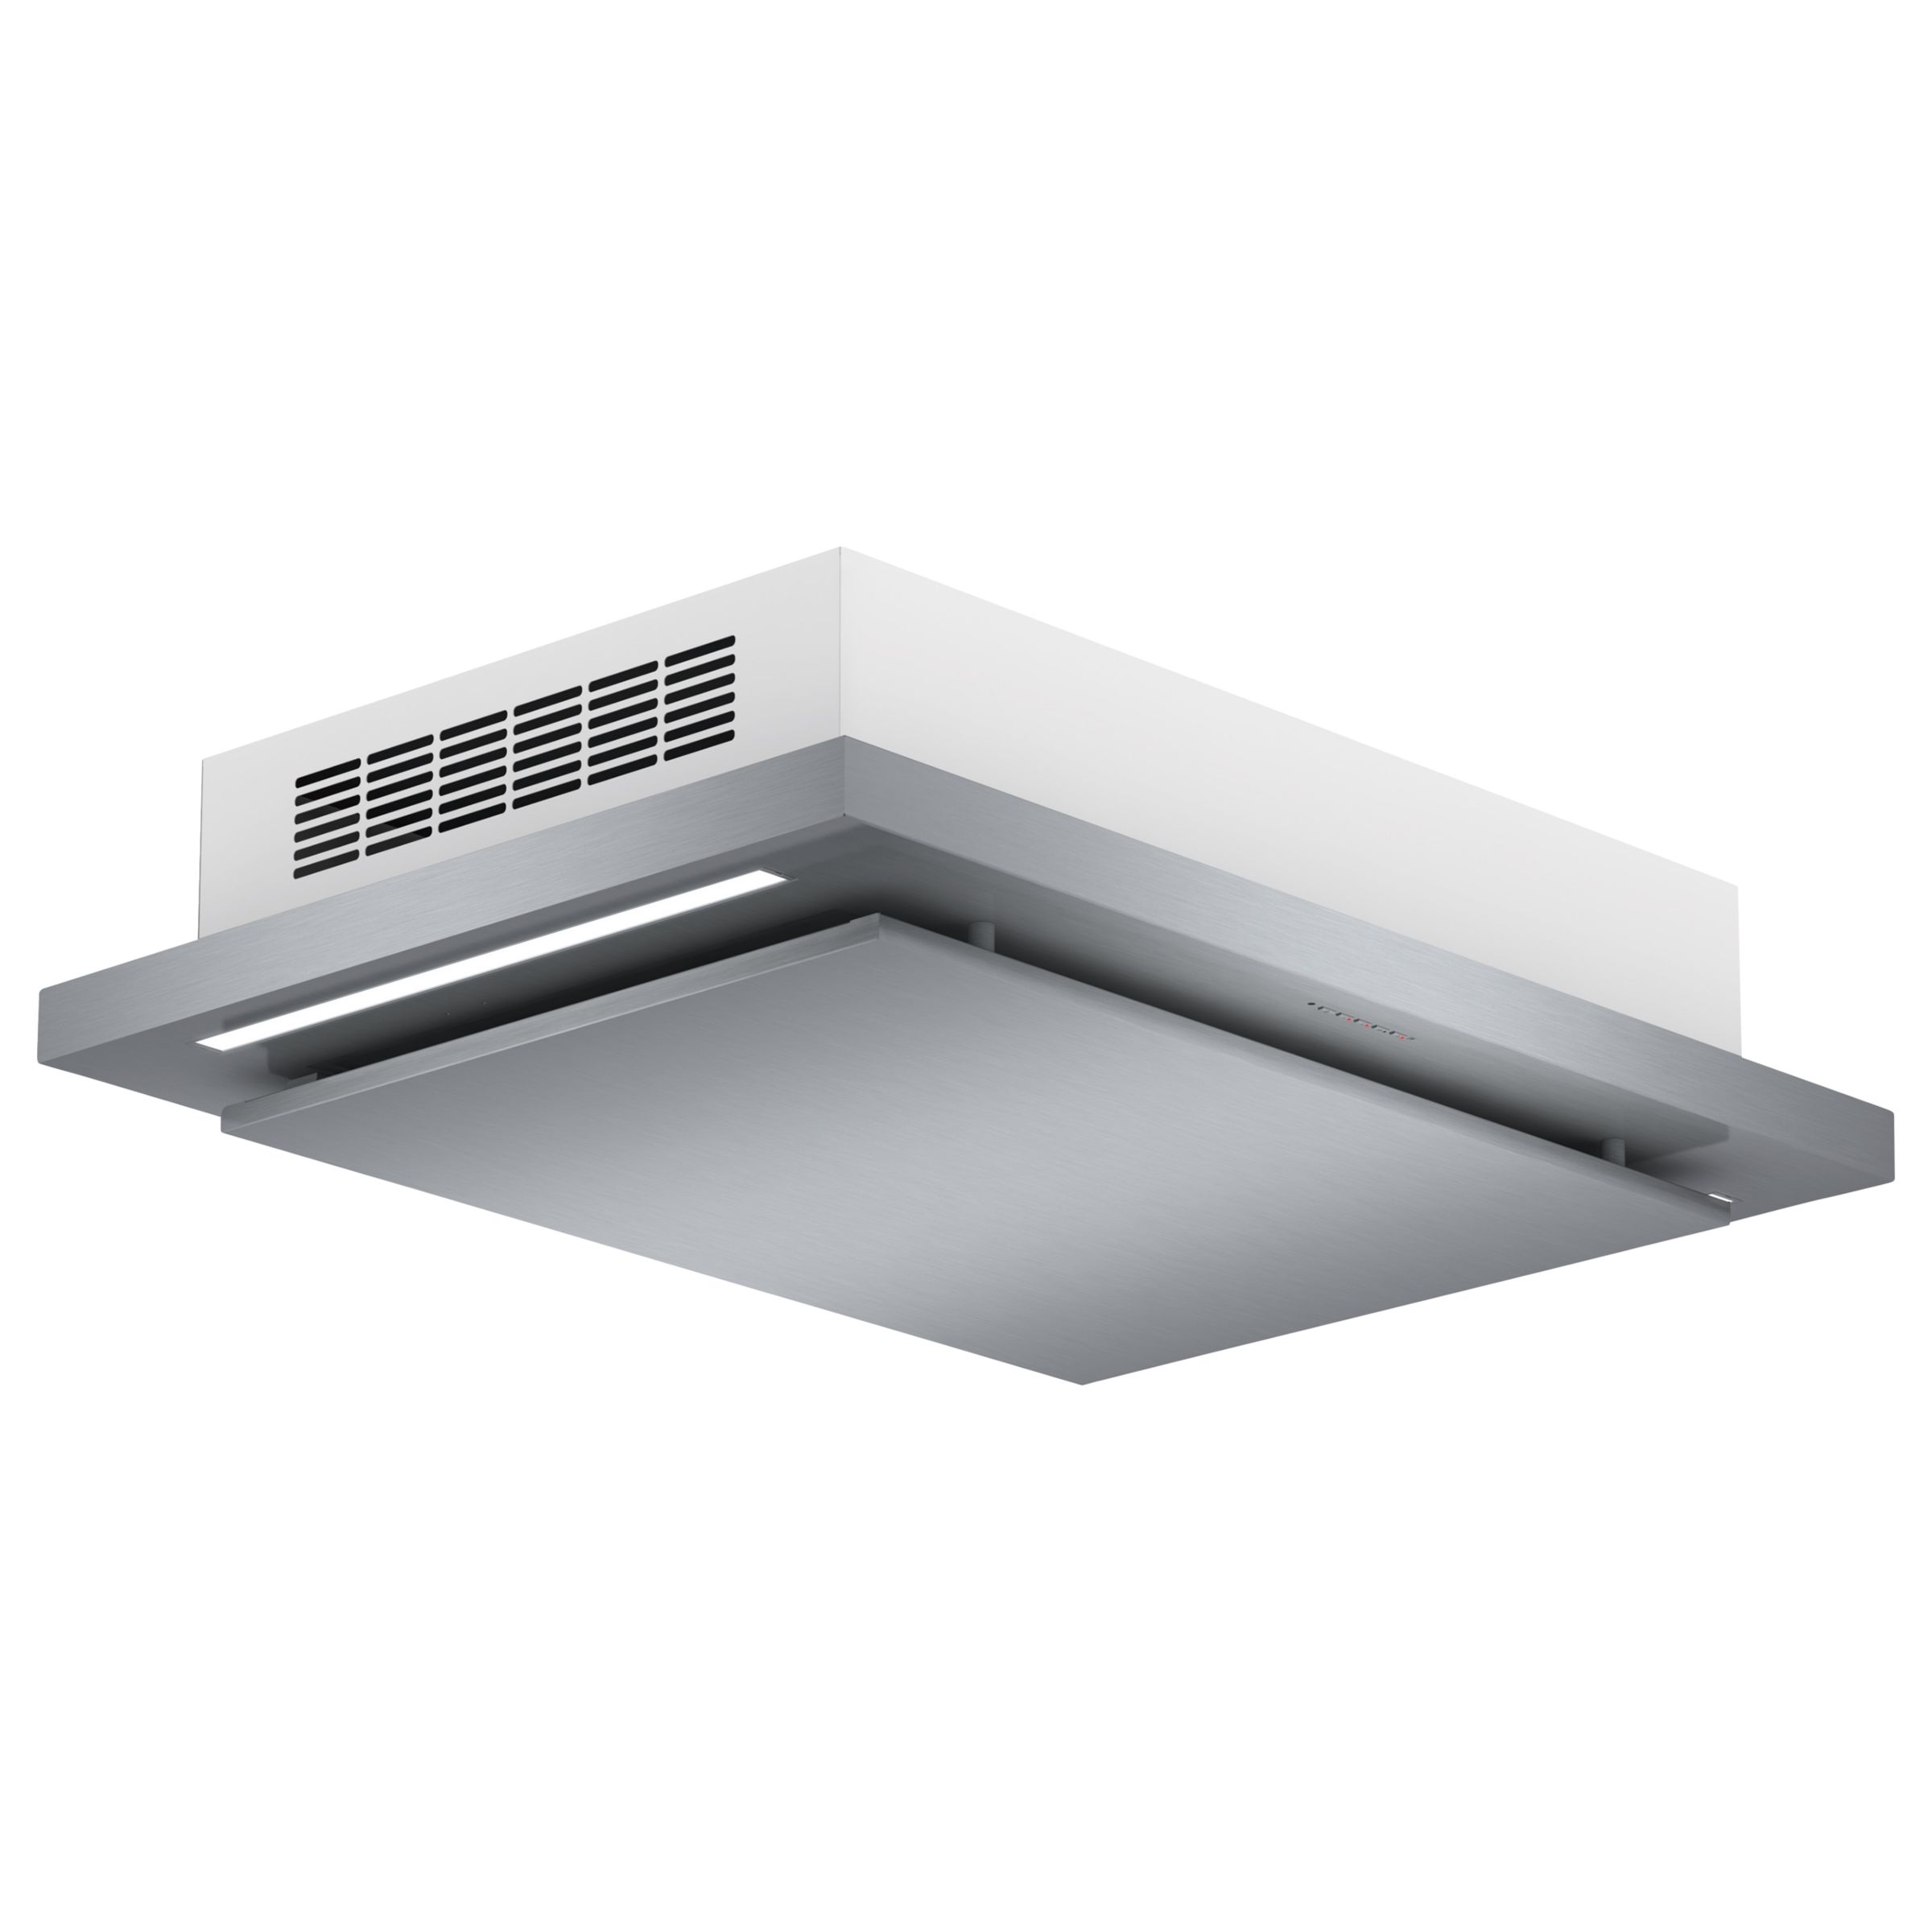 Bosch DID106T50 Ceiling Hood, Stainless Steel